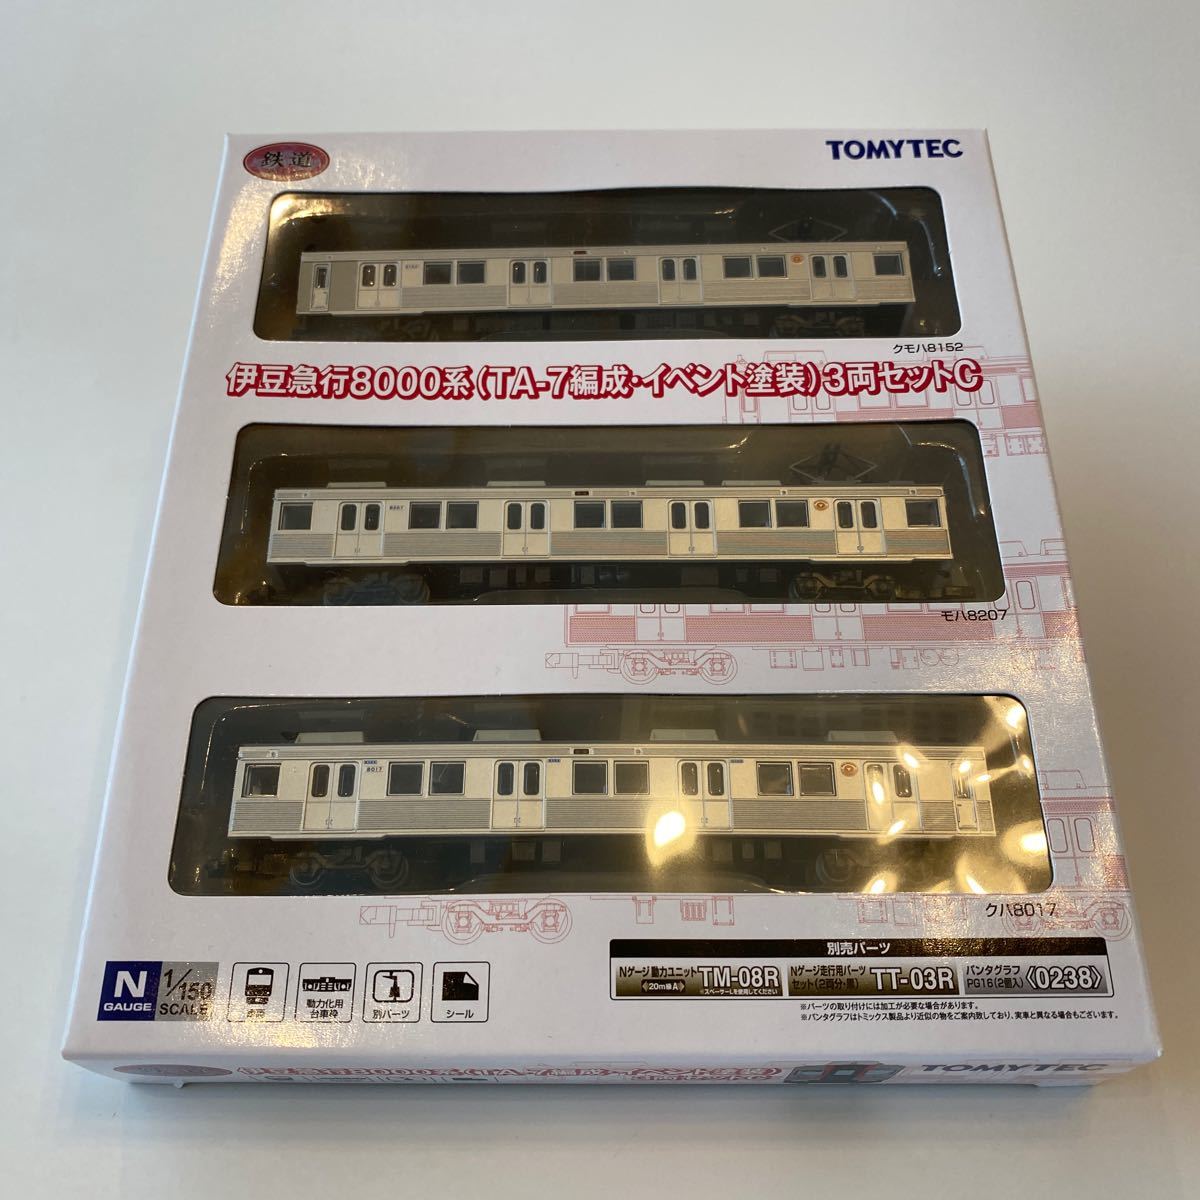  railroad collection . legume express 8000 series (TA-7 compilation .* Event painting ) 3 both set C